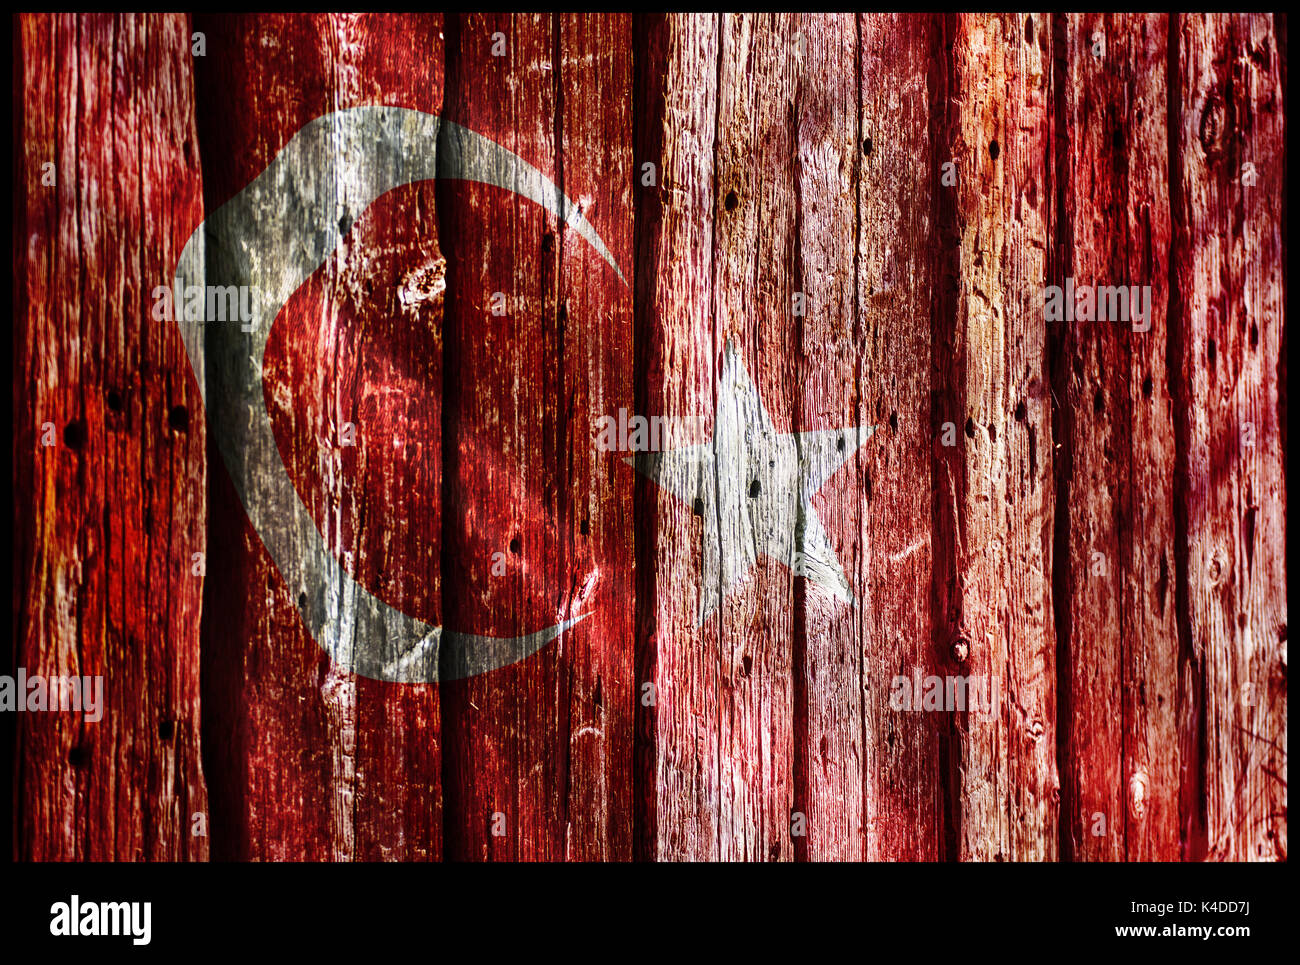 turkish flag on the wooden wall Stock Photo